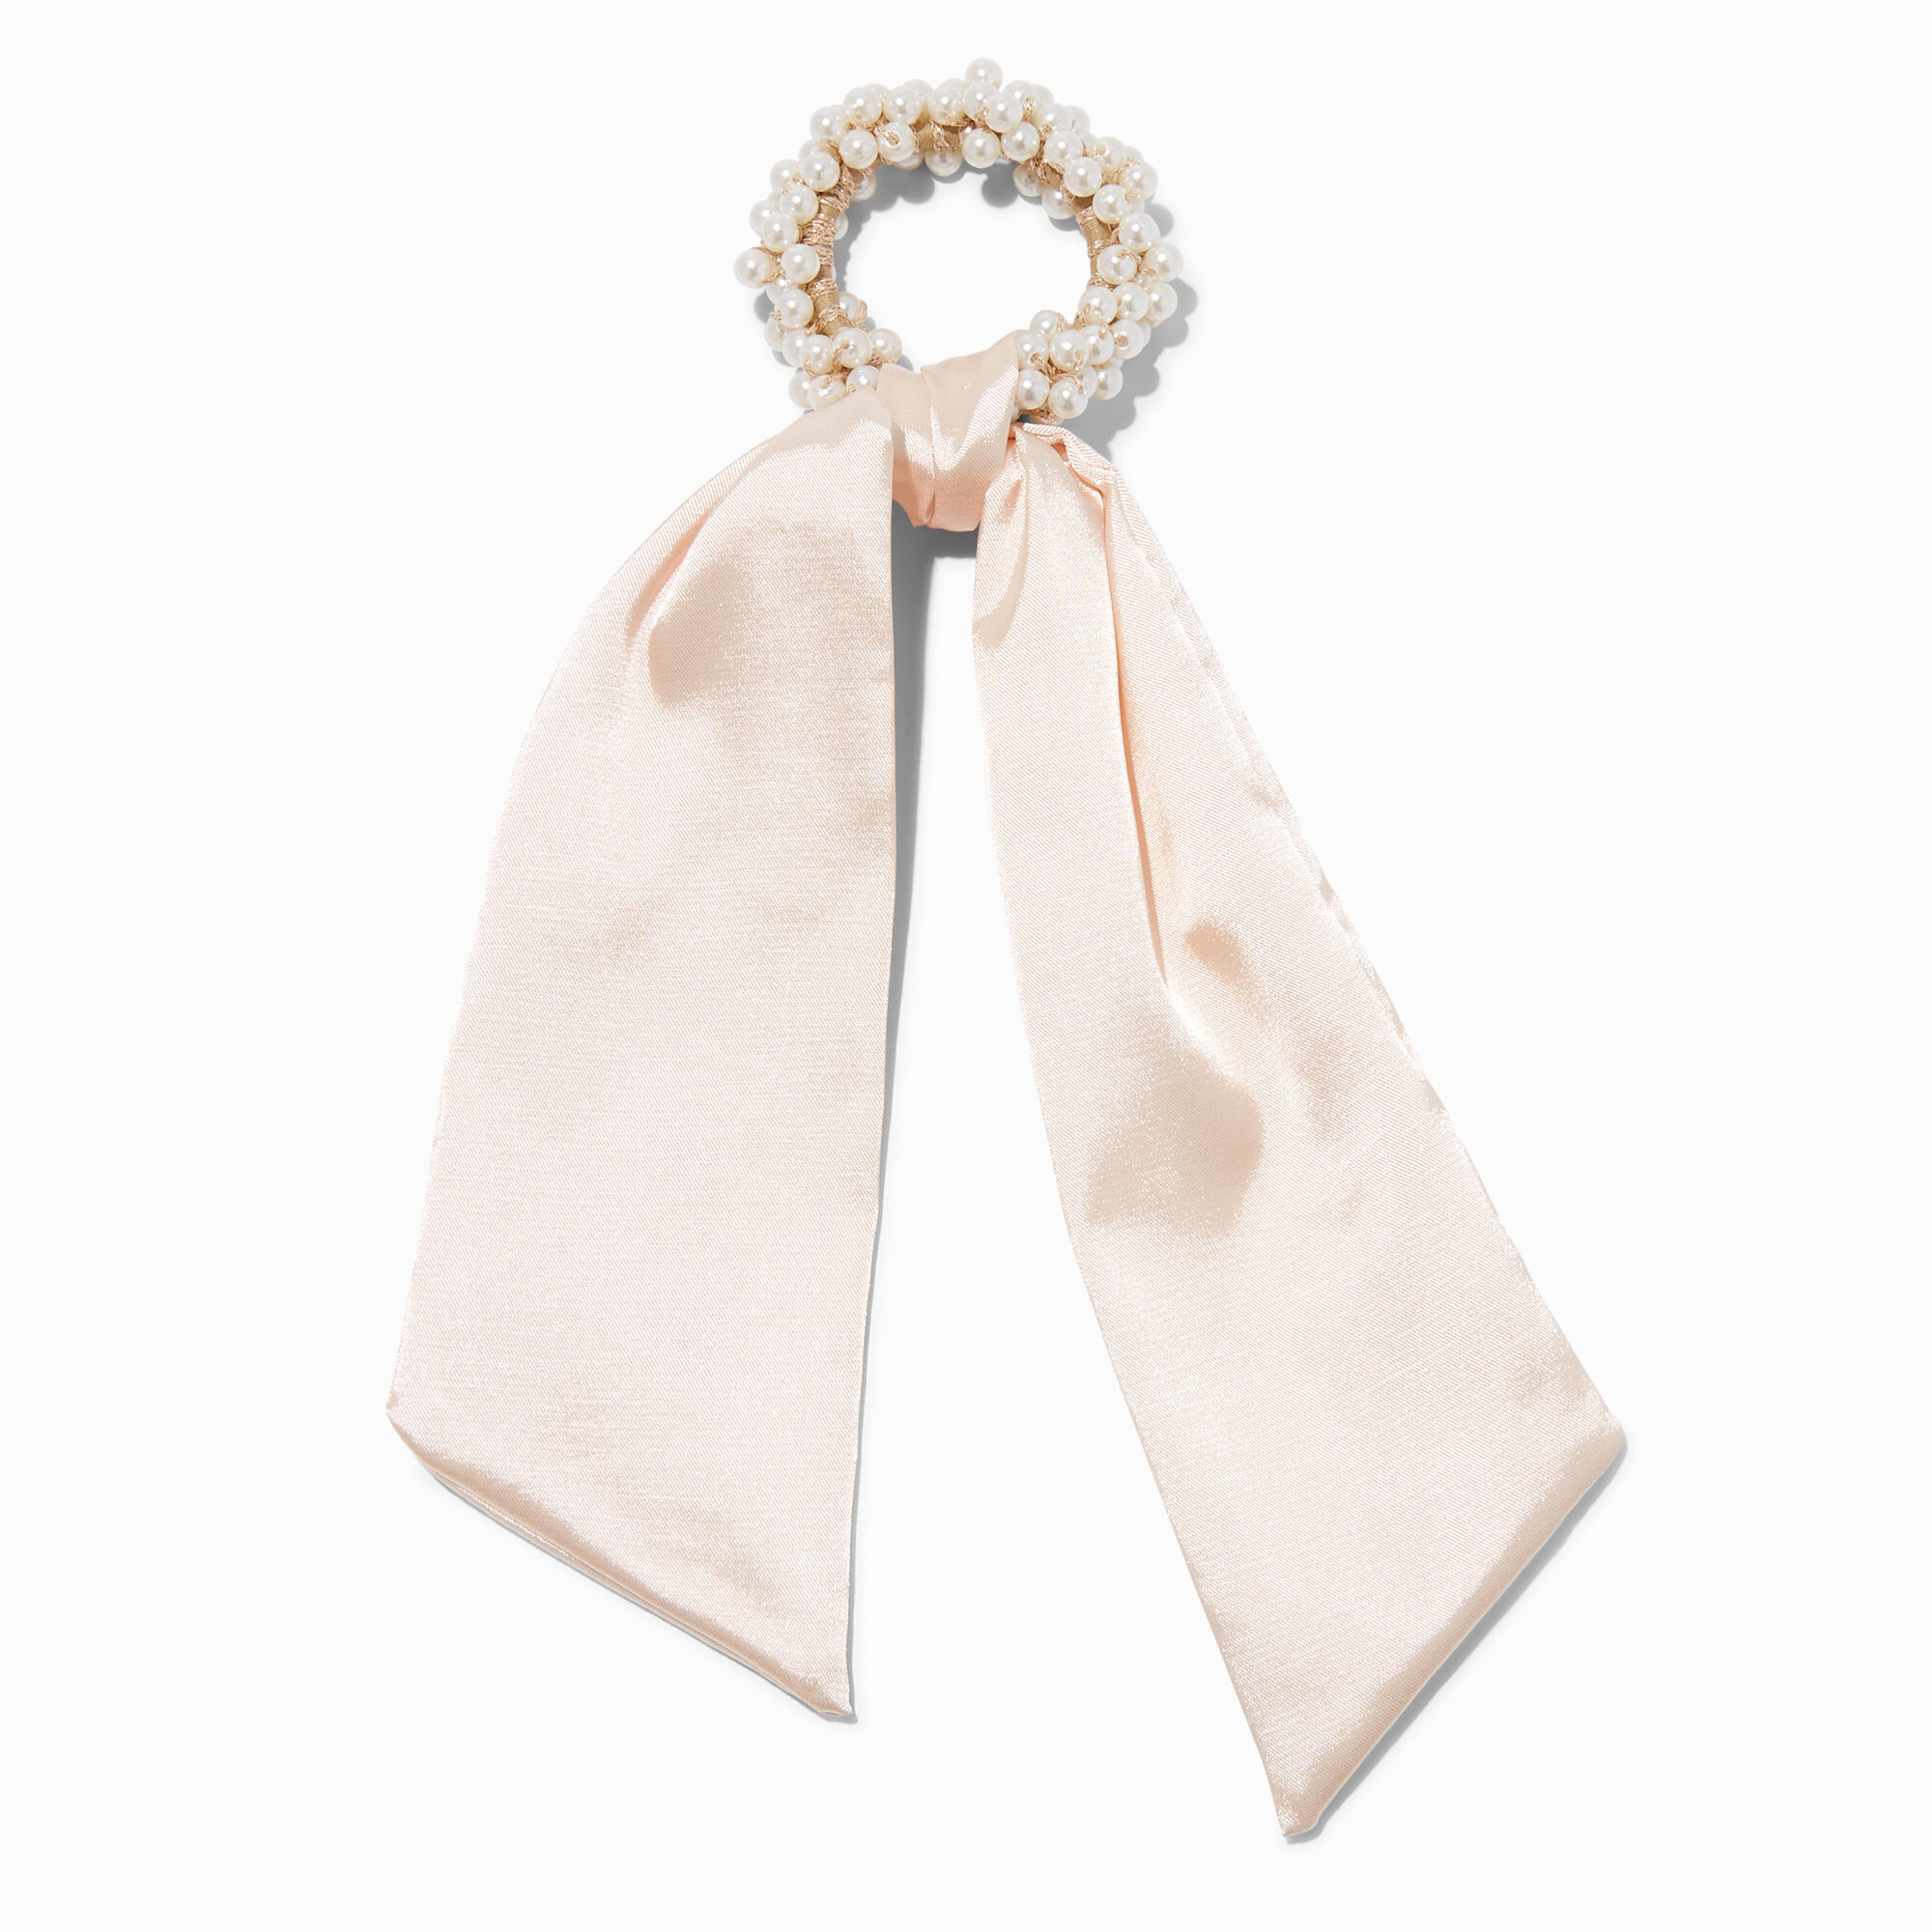 View Claires Pearl Hair Scrunchie Scarf White information